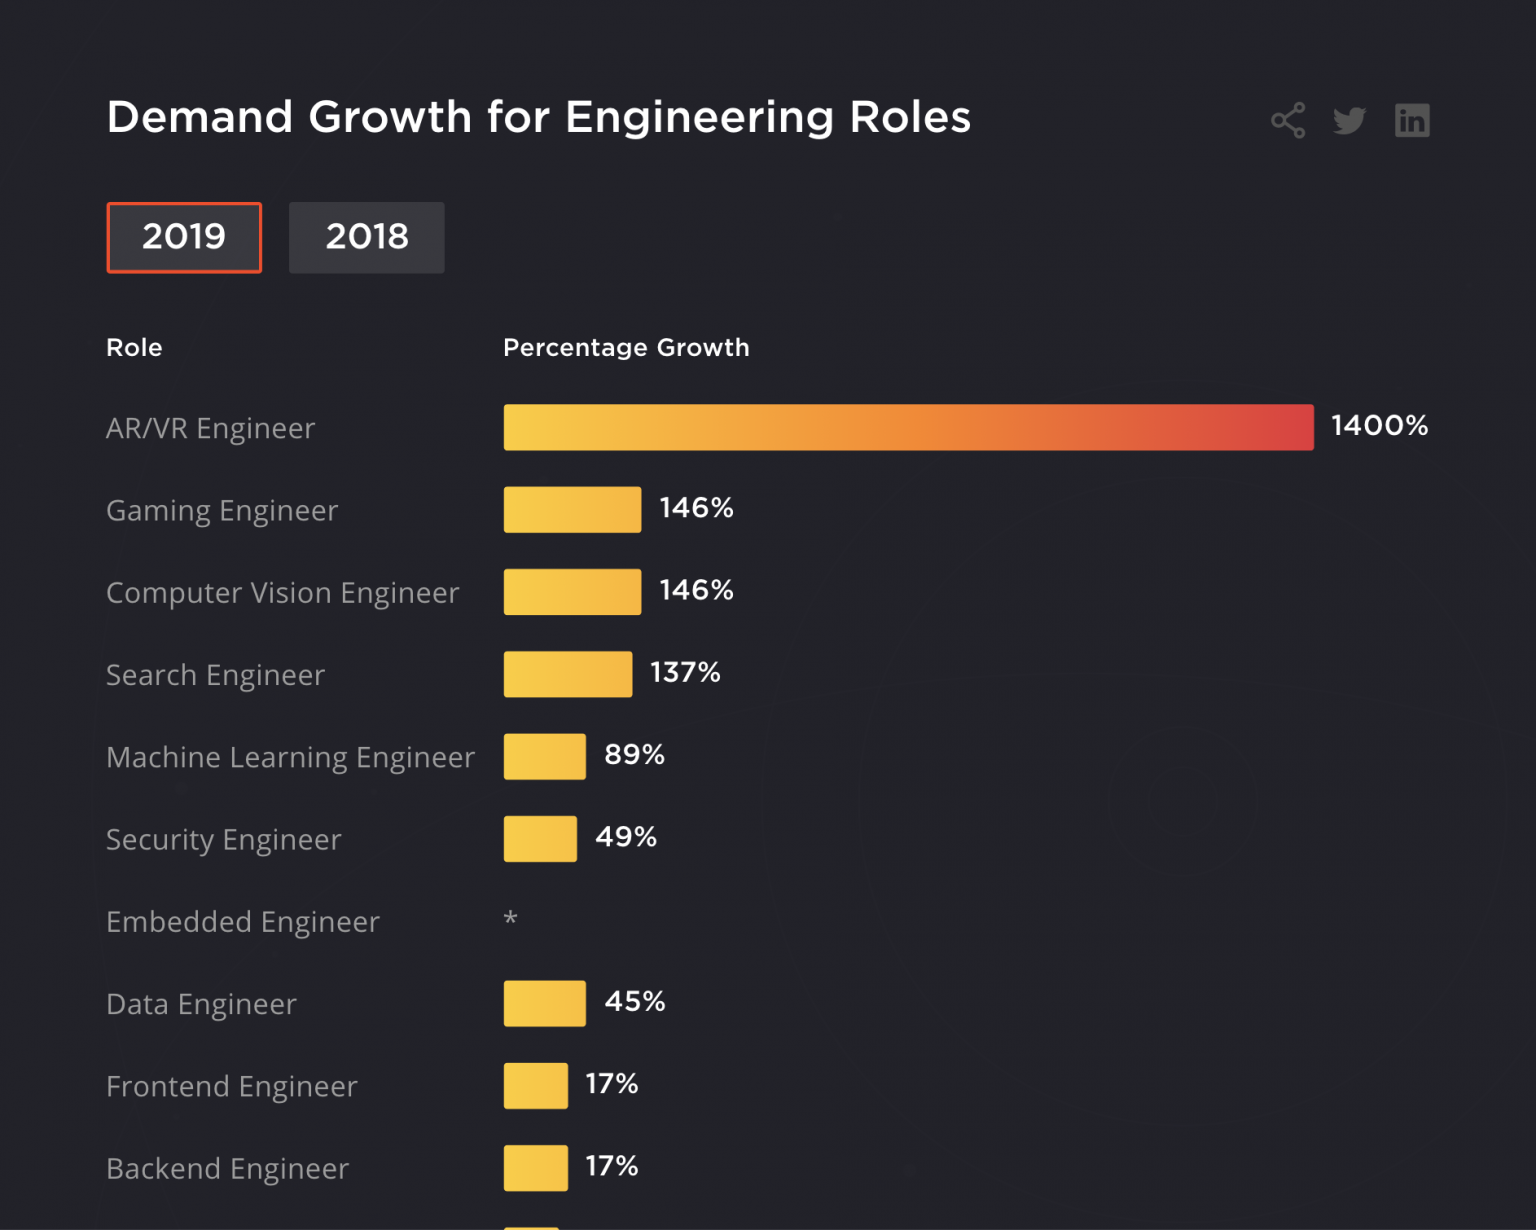 Demand Growth for Engineering Roles, eg. AR/VR Engineer, Gaming Engineer and so on